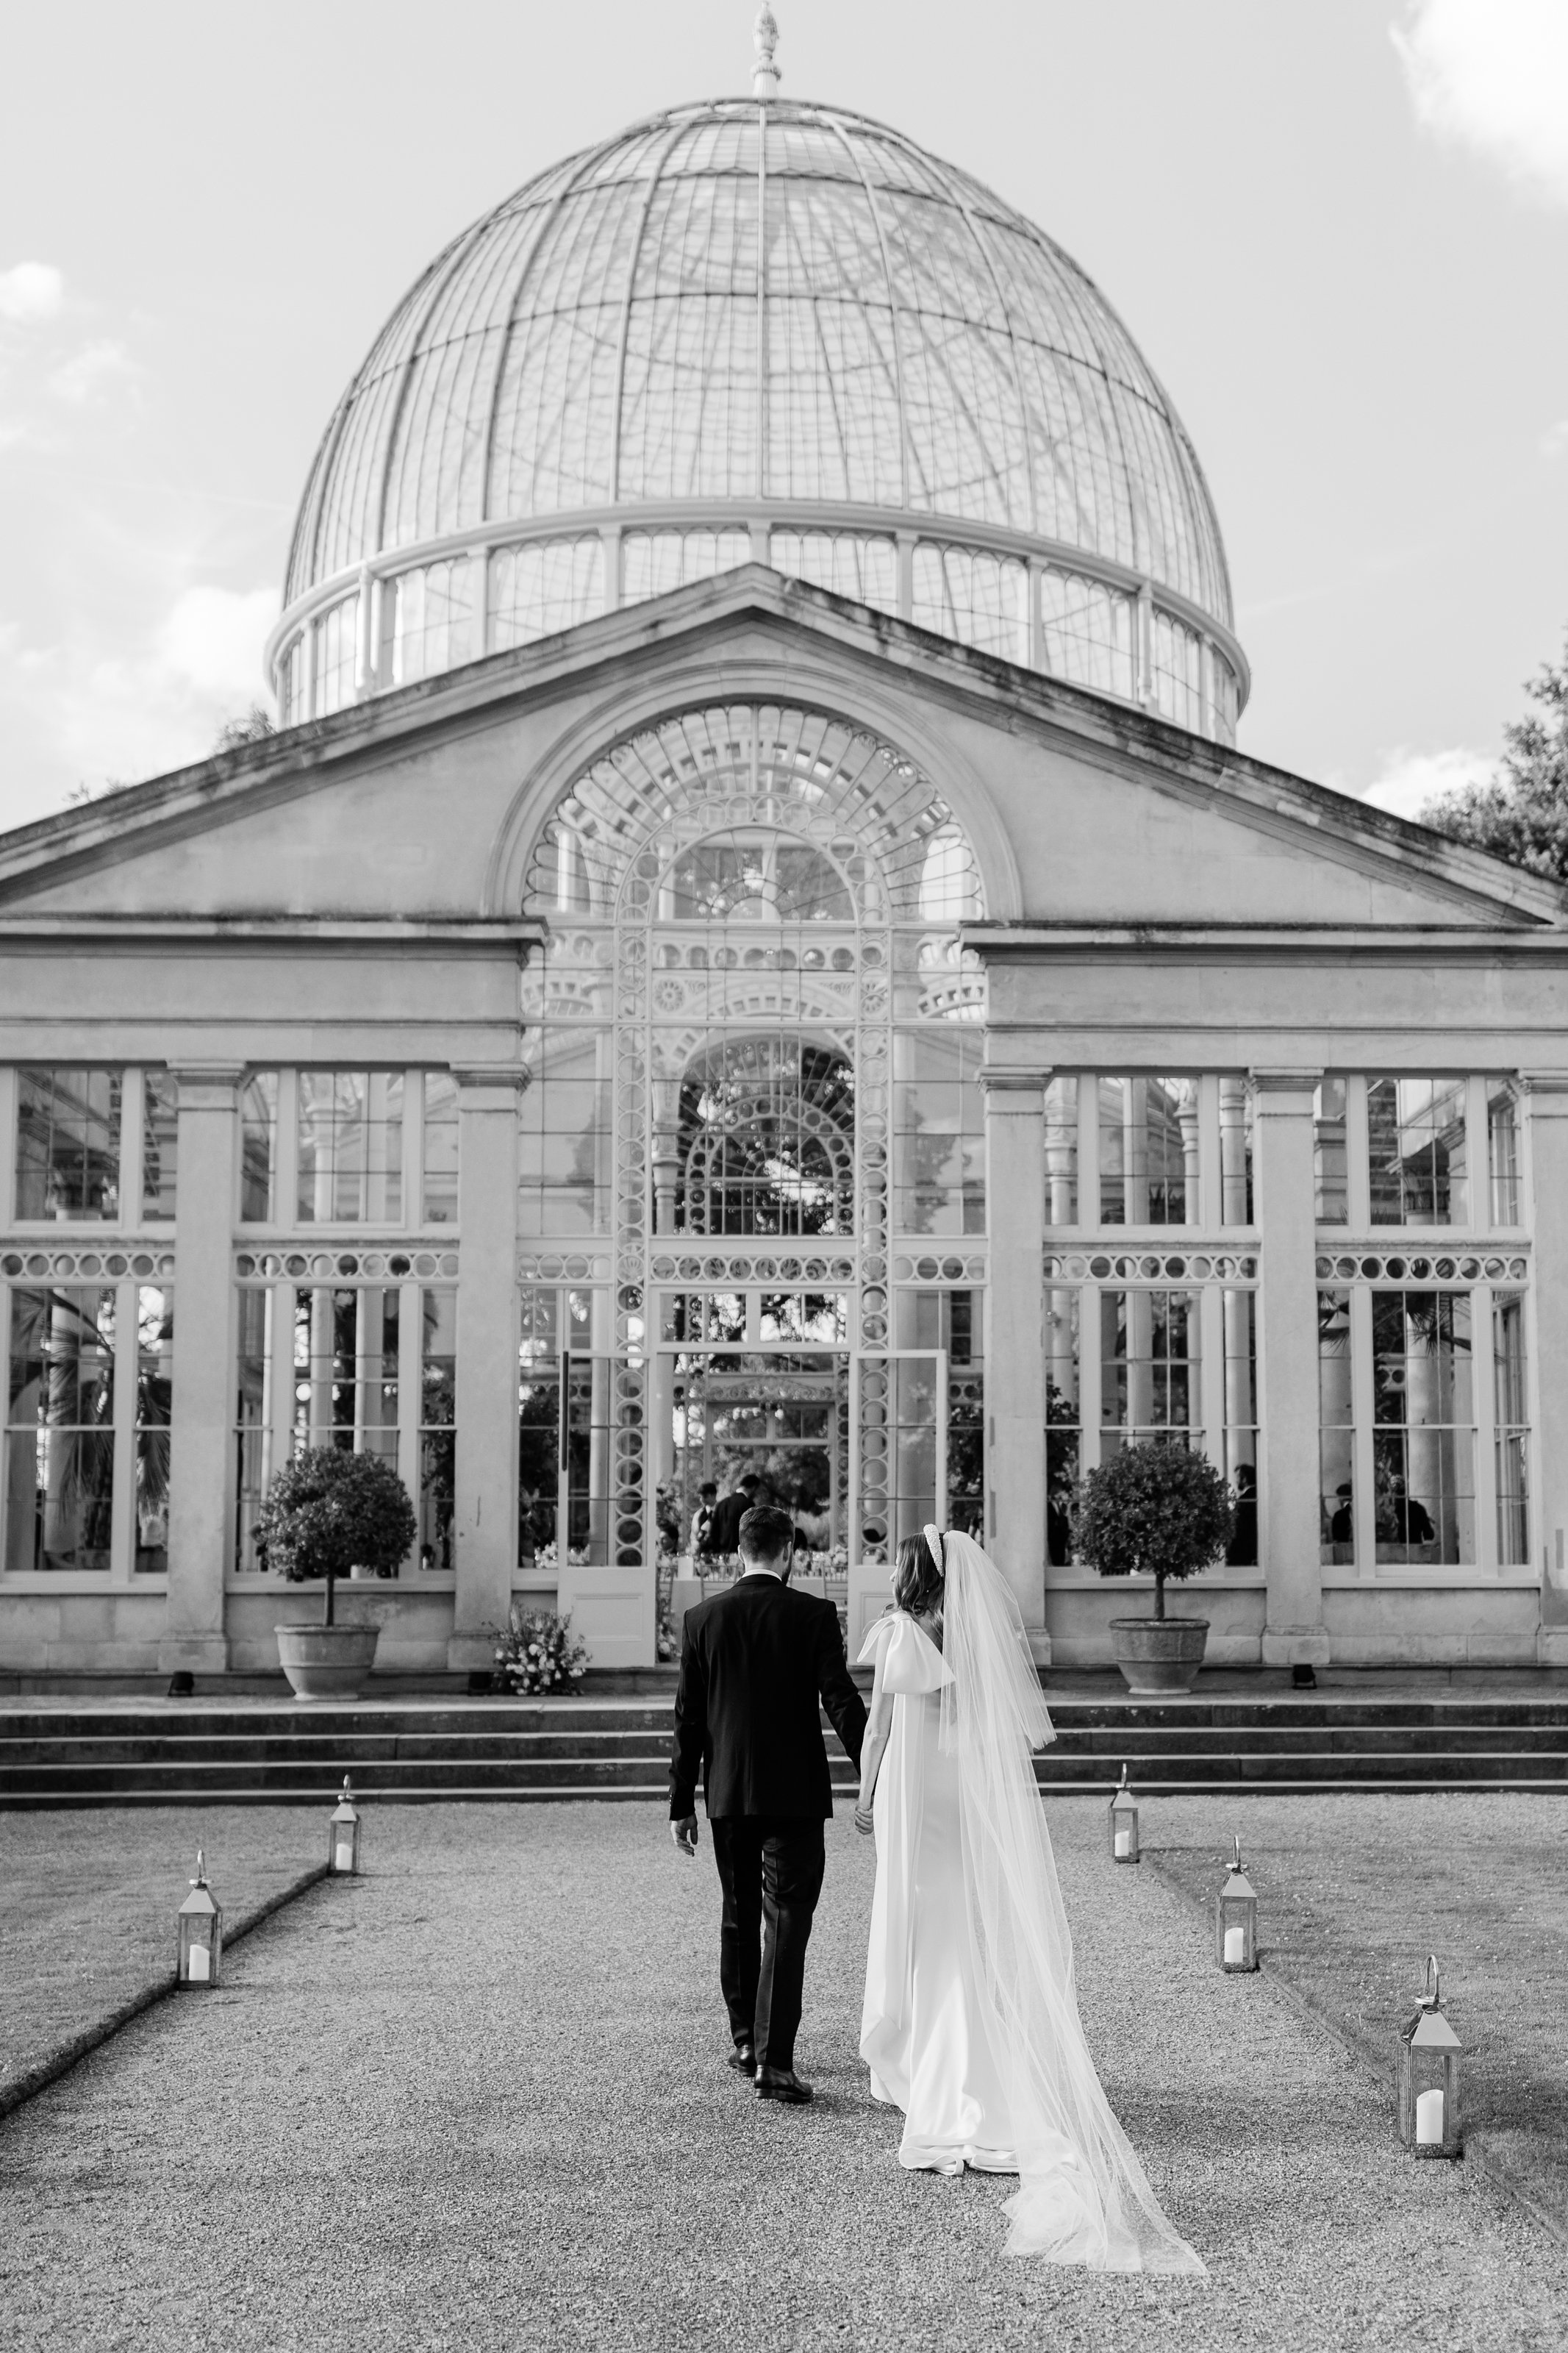 Bride and groom walking to the conservatory at Syon Park